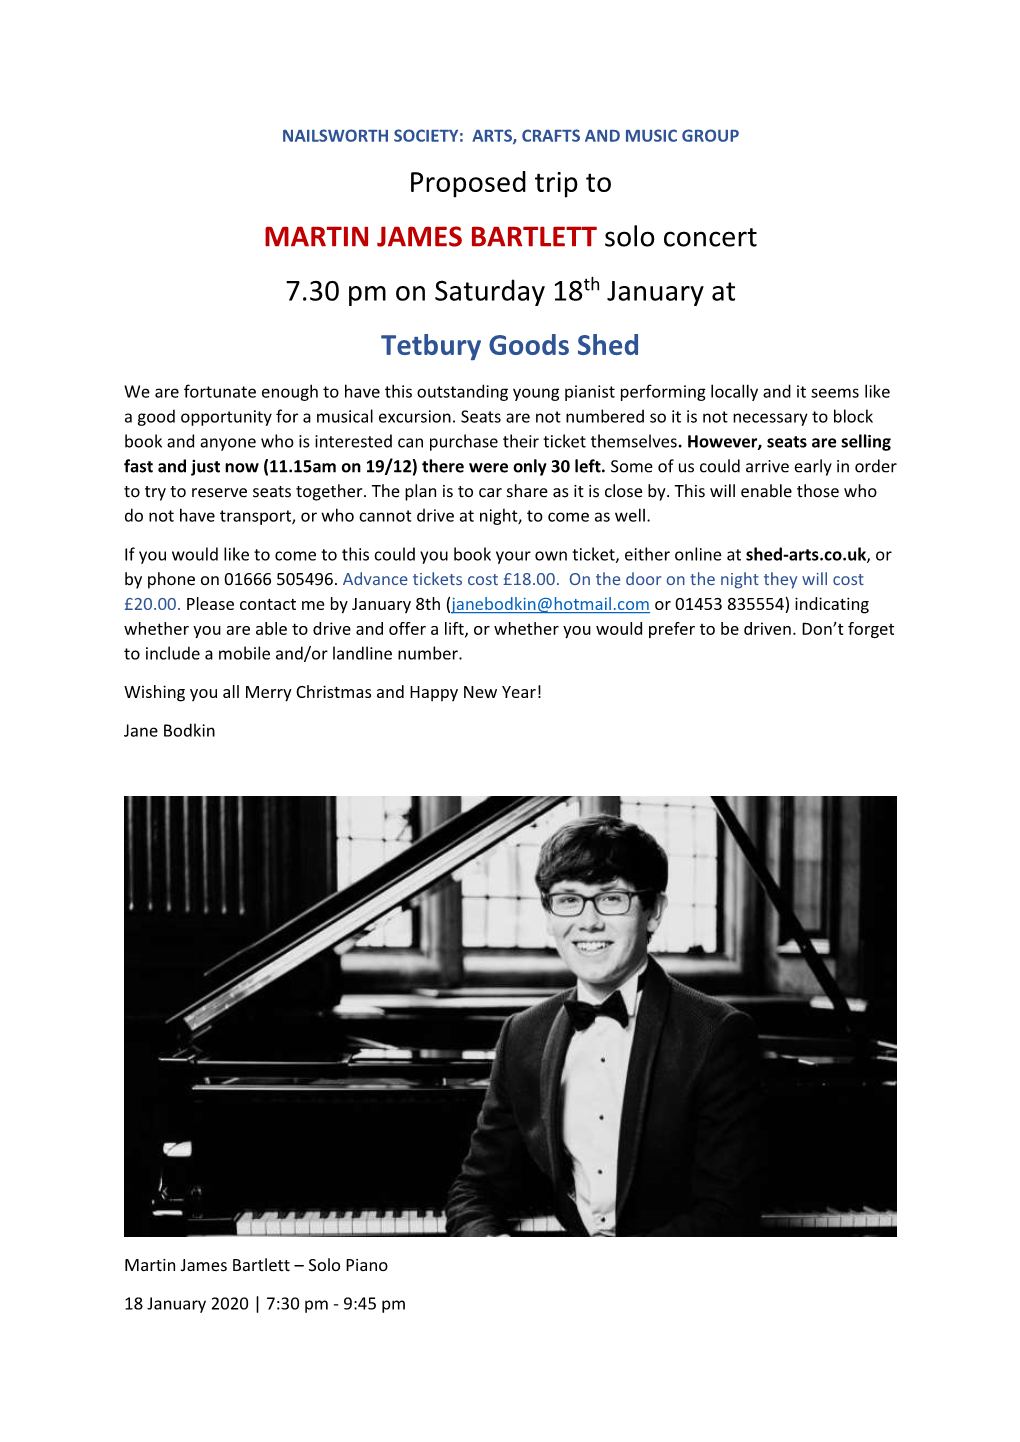 Proposed Trip to MARTIN JAMES BARTLETT Solo Concert 7.30 Pm on Saturday 18Th January at Tetbury Goods Shed